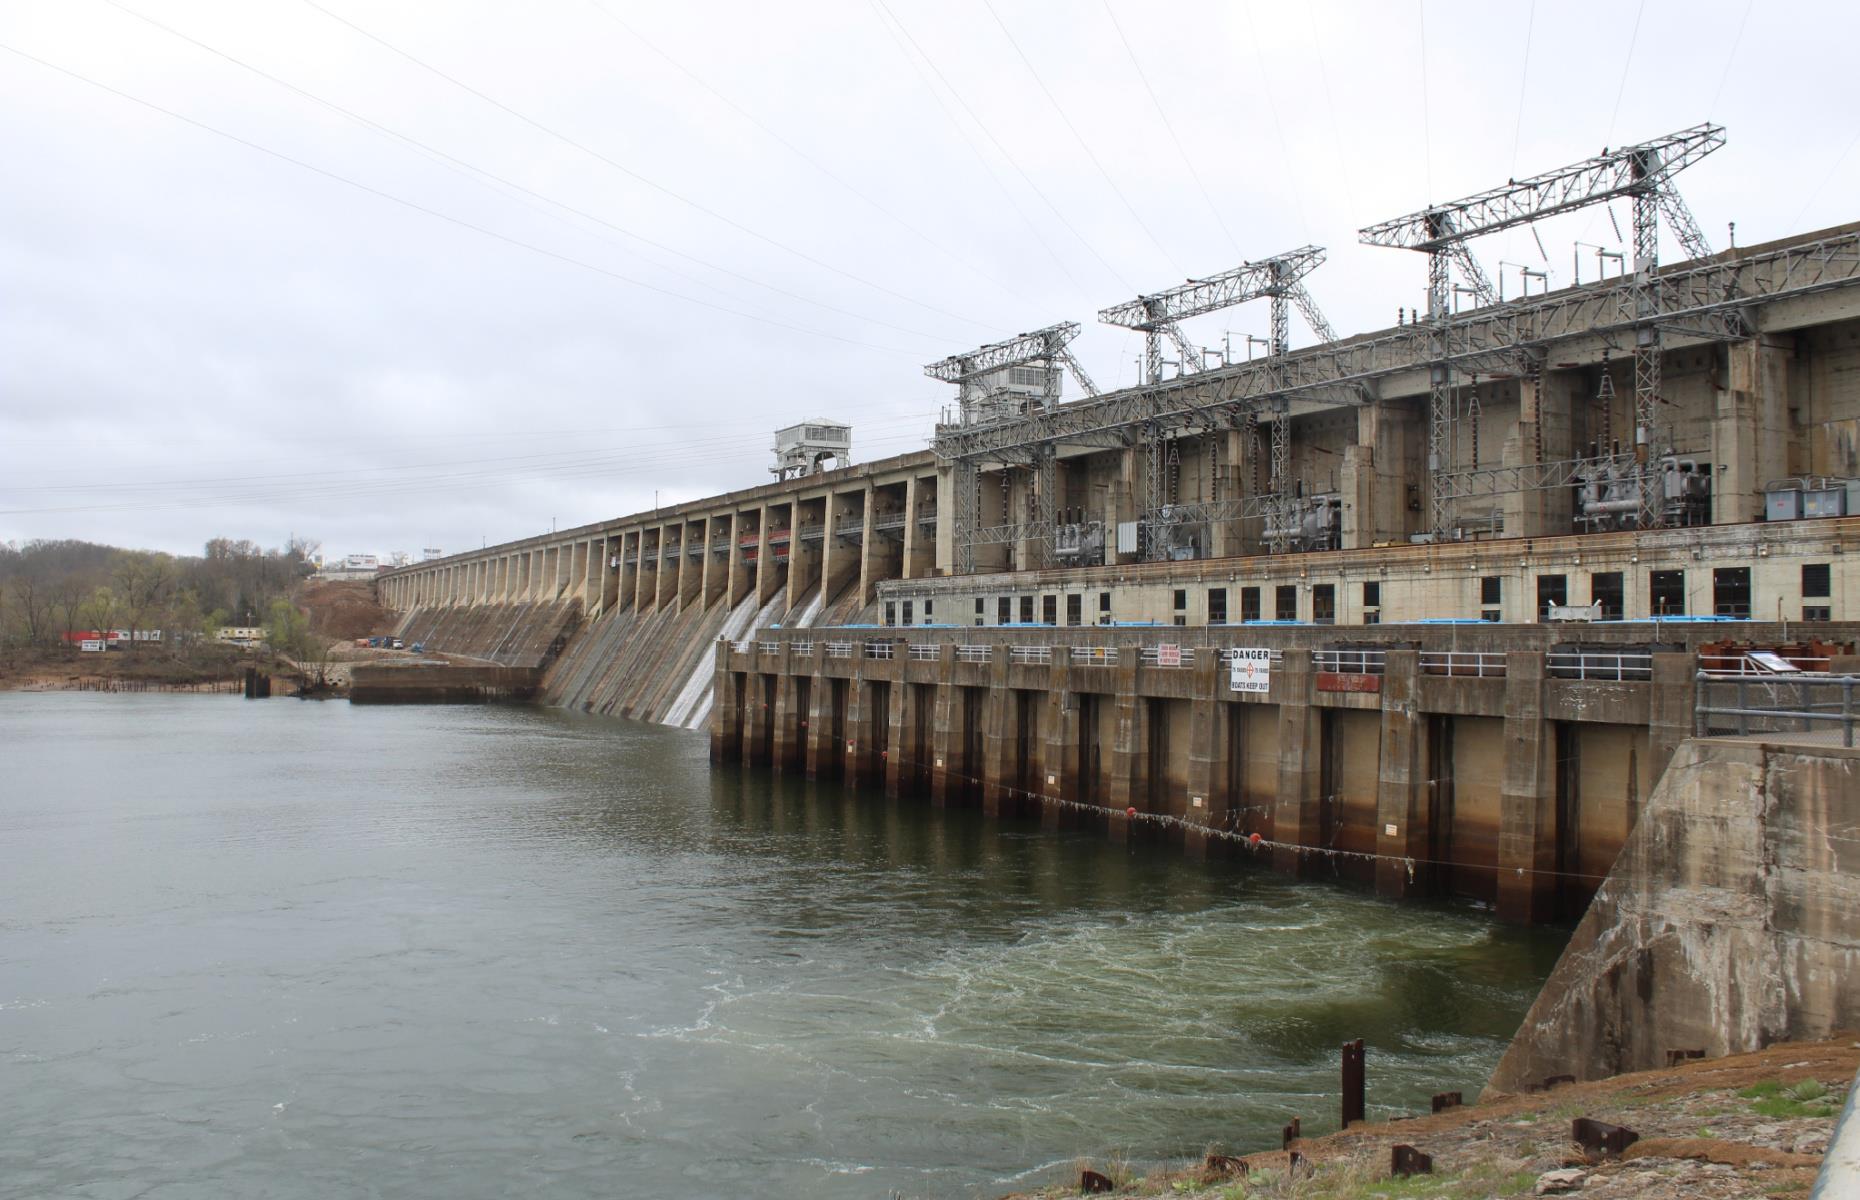 <p>Bagnell Dam, <a href="https://www.ameren.com/missouri/residential/lake-of-the-ozarks/bagnell-dam">the largest and last major dam</a> in the United States to be financed through private investment, is the reason the Lake of the Ozarks exists. The spectacular feat of engineering harnesses the Osage River and is a half-mile (0.8km) long, holding back 600 billion gallons of water. It’s a producer of energy, creating enough power to supply 42,000 households throughout the year.</p>